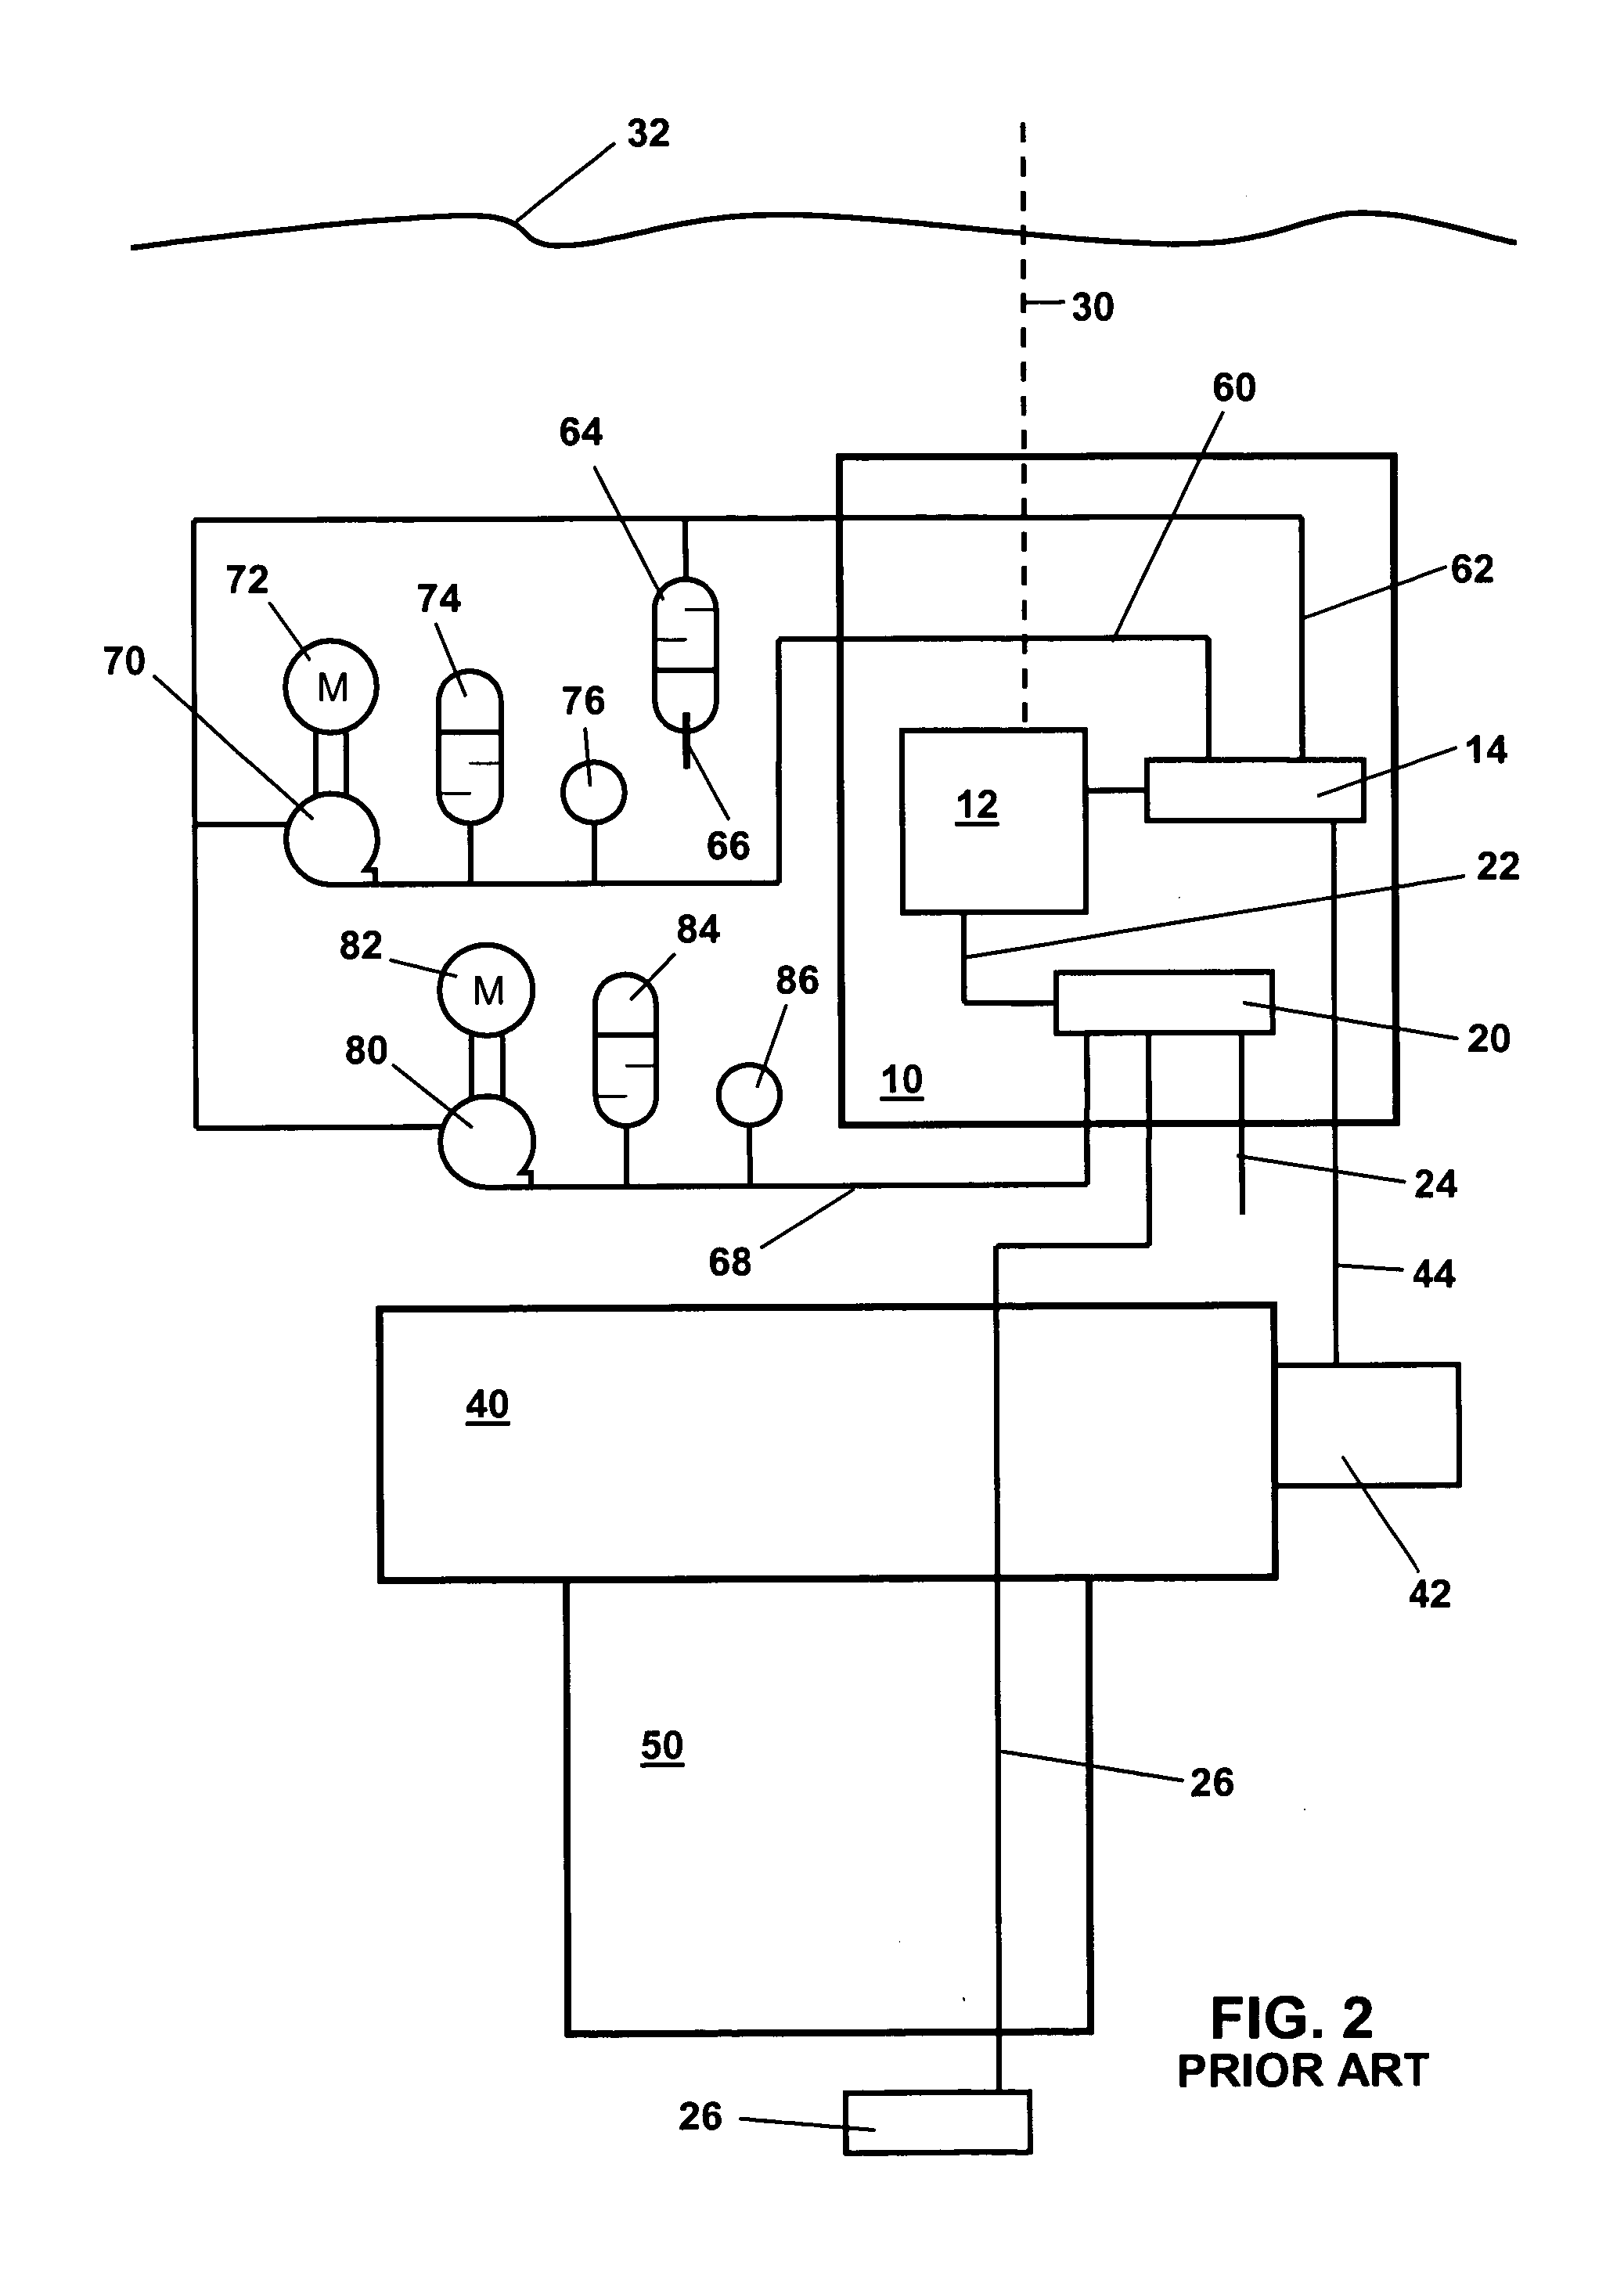 System for controlling a hydraulic actuator, and methods of using same